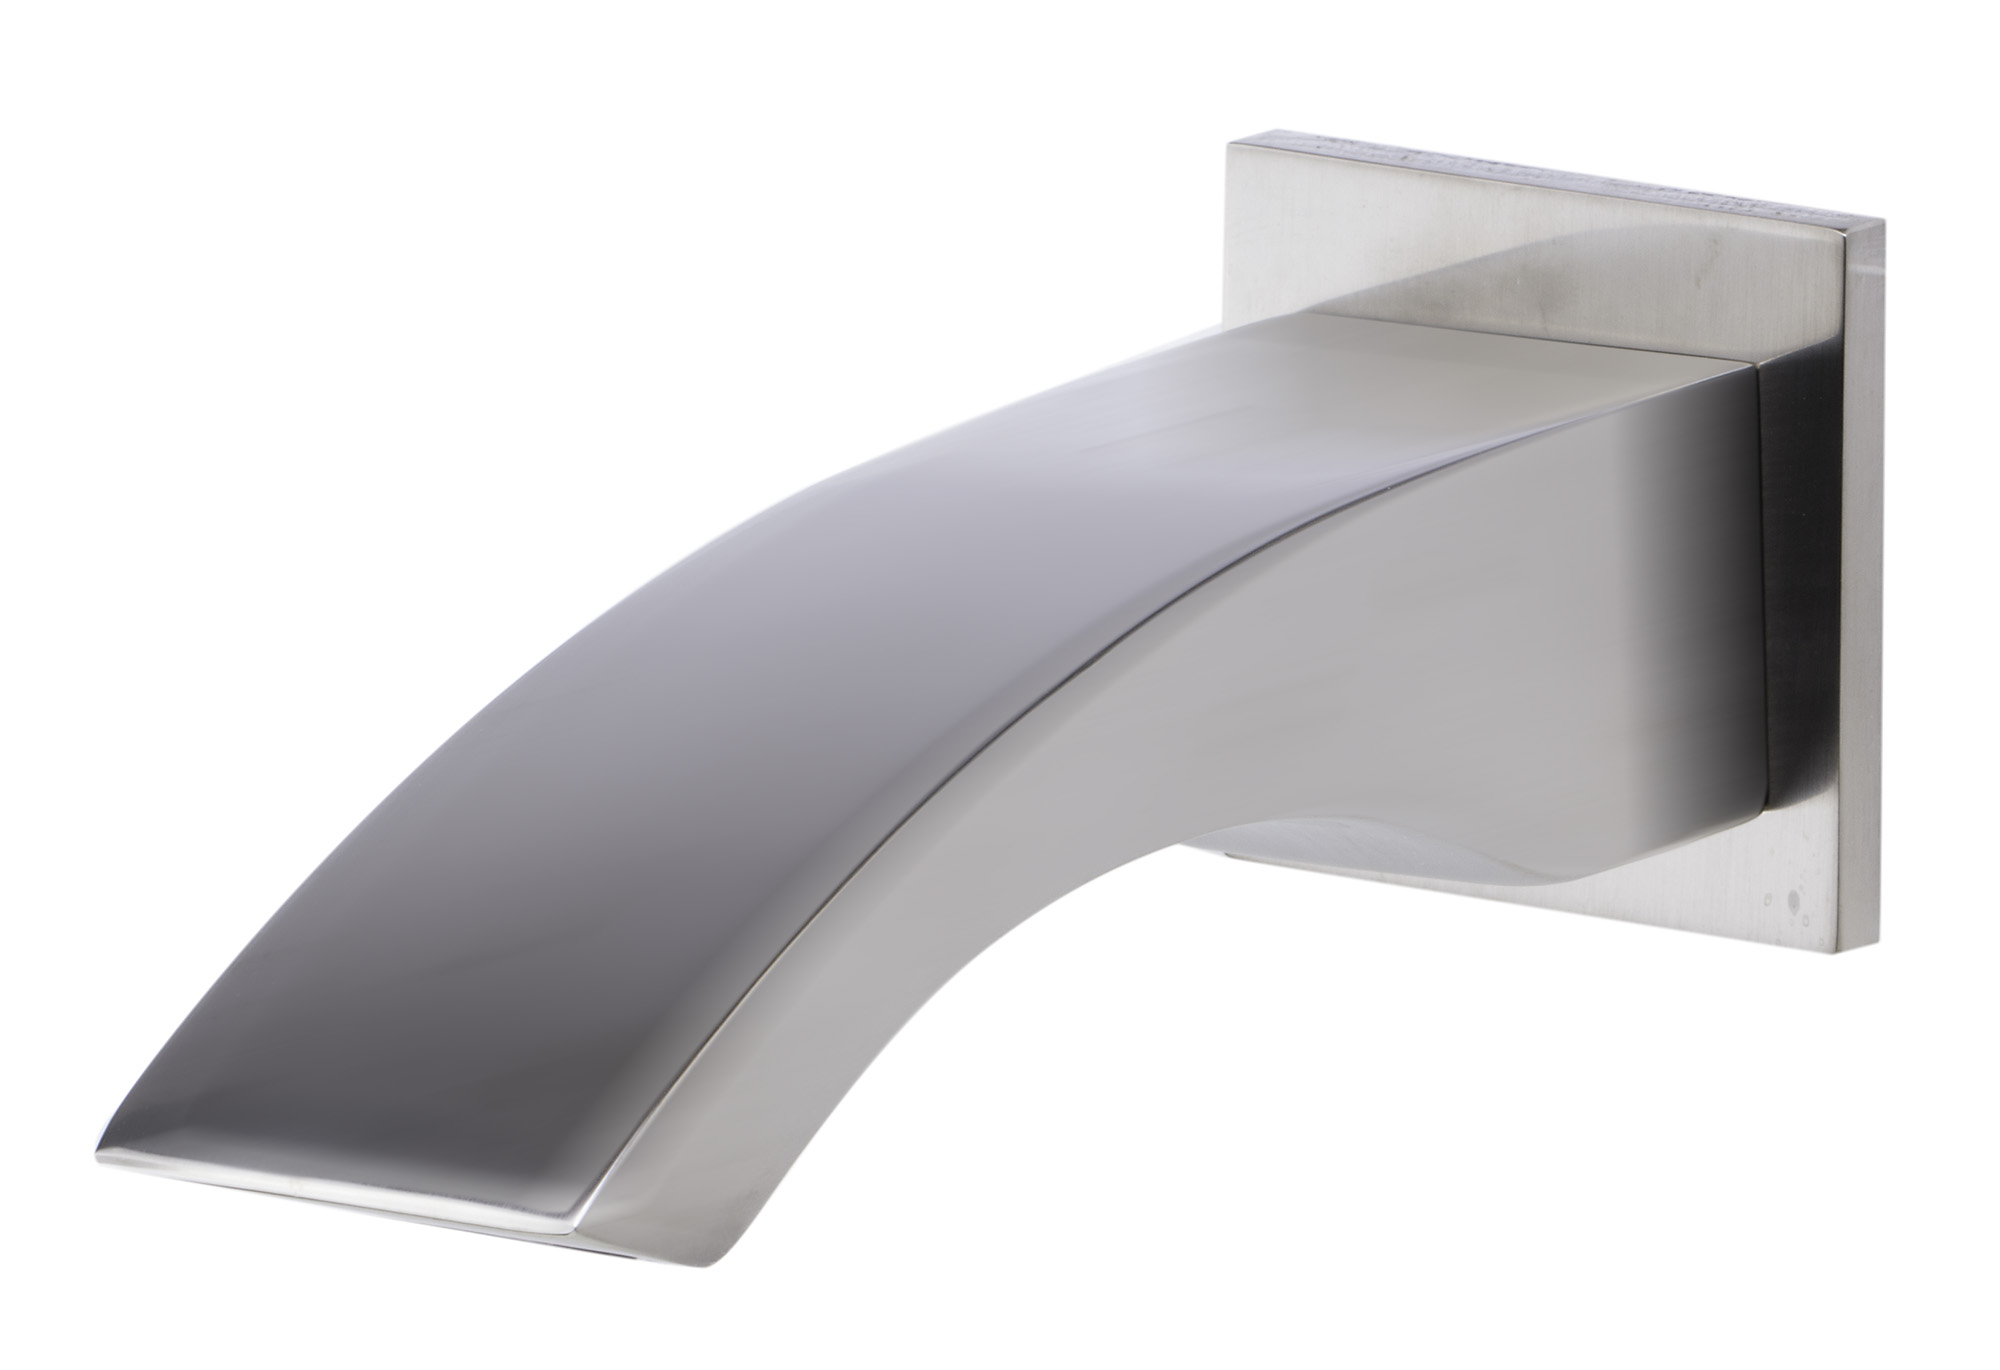 ALFI brand Brass, AB3301-BN Brushed Nickel Curved Wallmounted Tub Filler Bathroom Spout